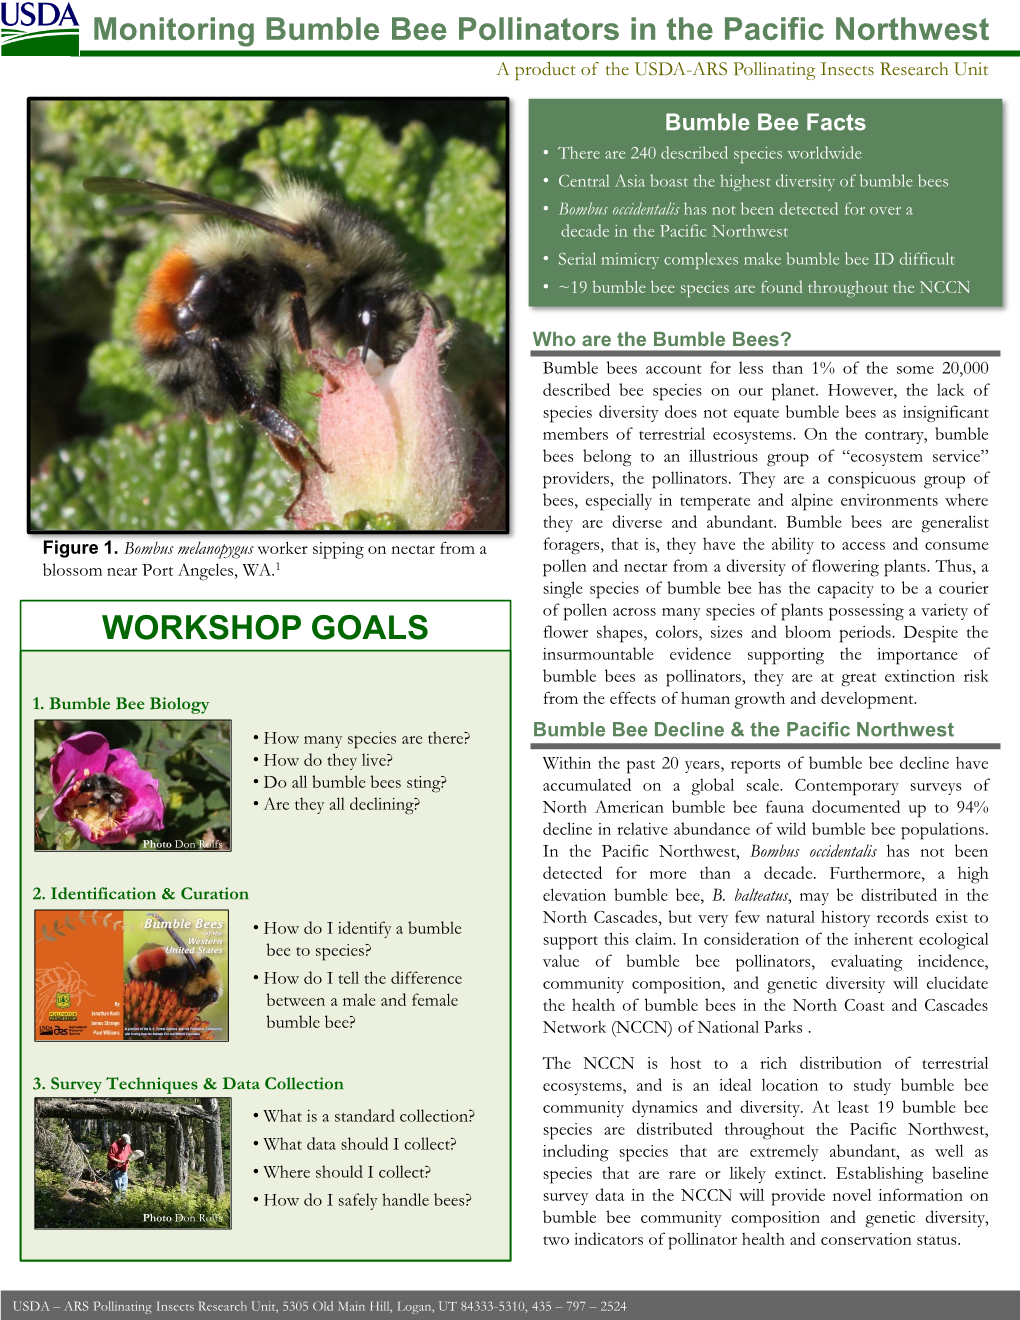 Monitoring Bumble Bee Pollinators in the Pacific Northwest a Product of the USDA-ARS Pollinating Insects Research Unit